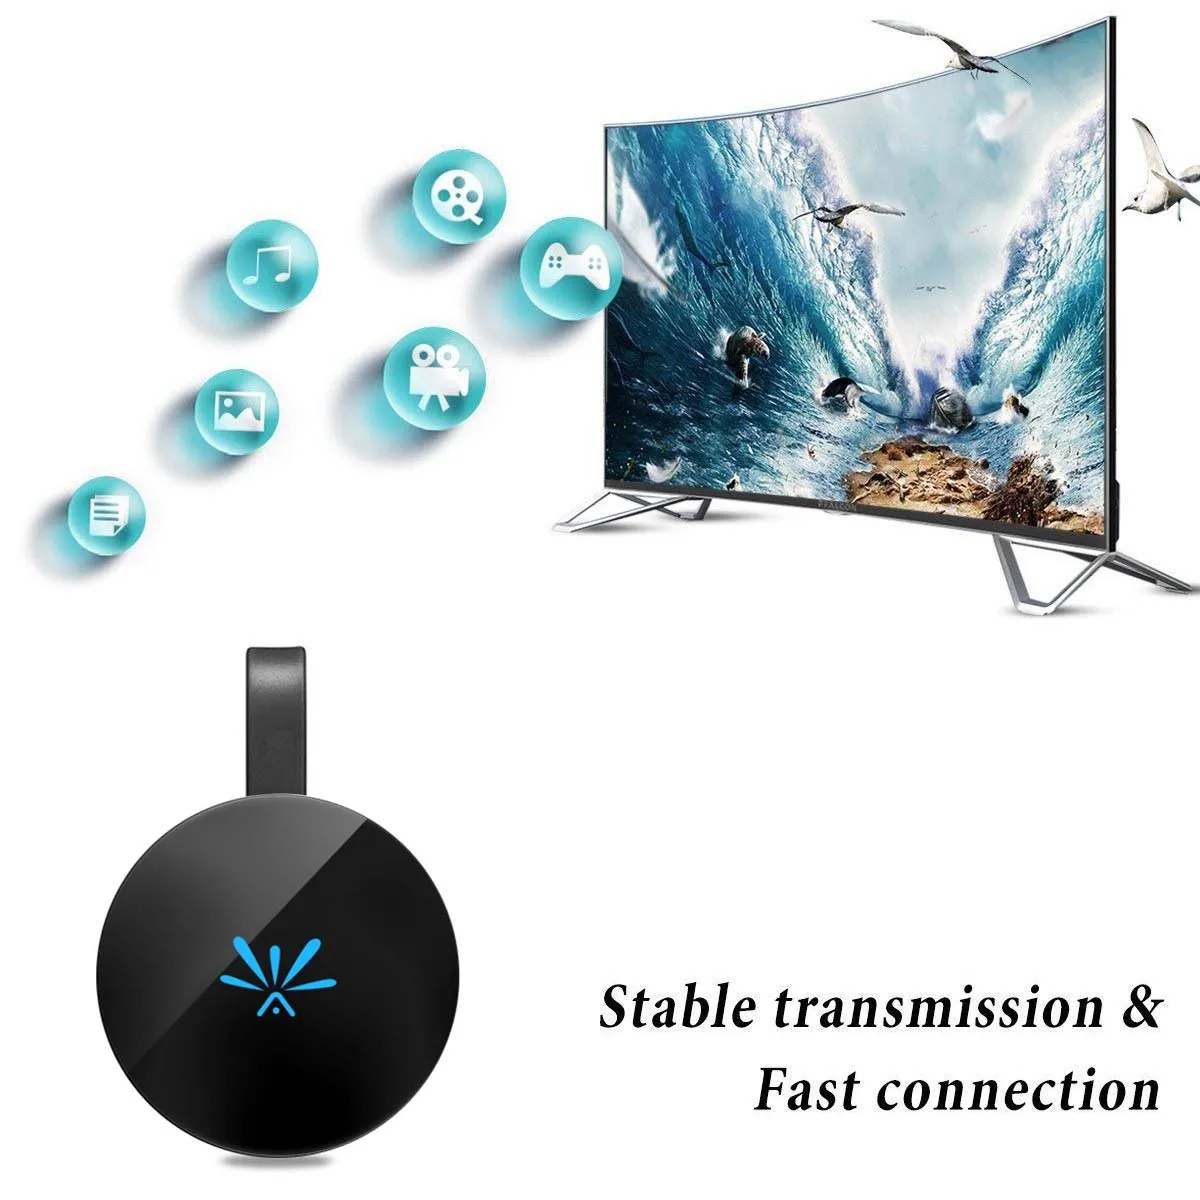 

G6 TV Stick 2.4GHz Video WiFi Display Dongle HD Digital 1080P HDMI Media Video Streamer Dongle Receiver For Chromecast 2